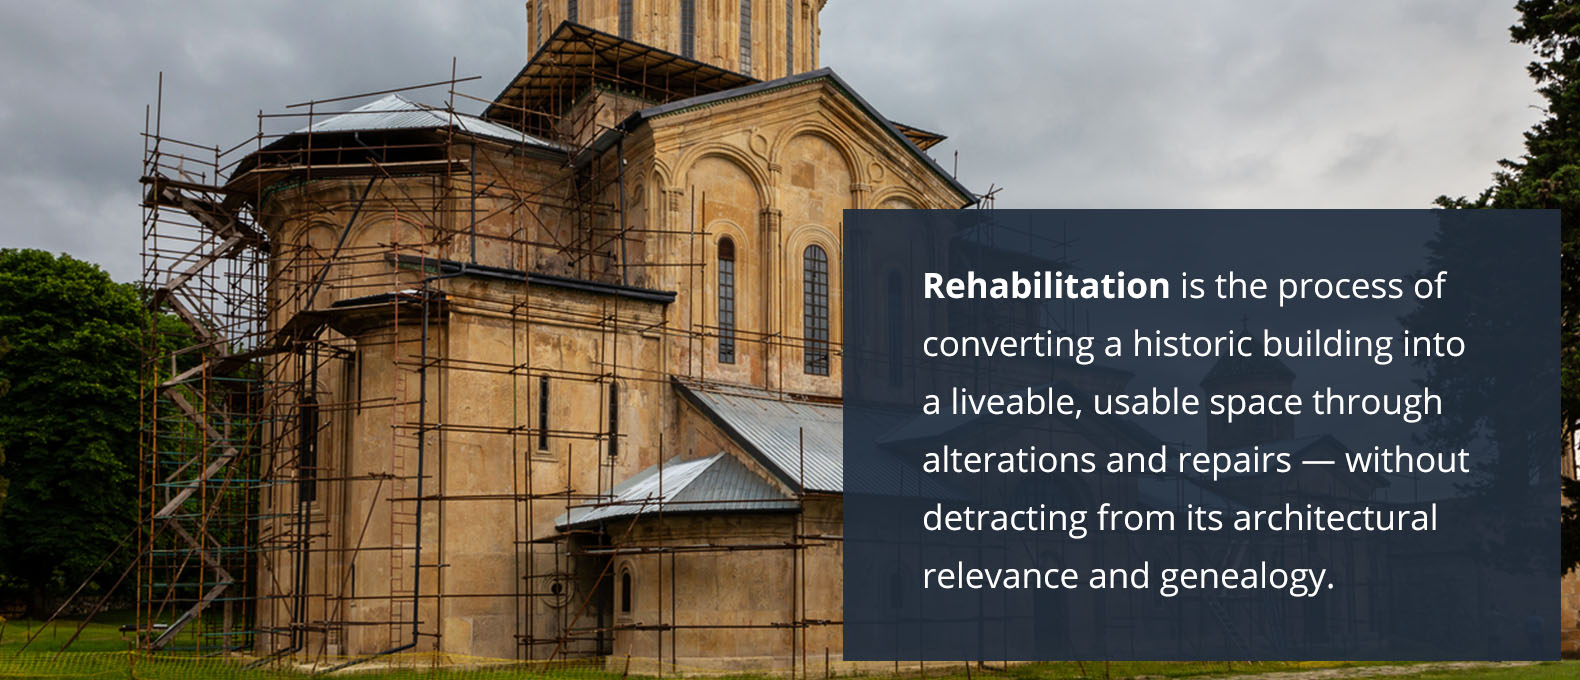 Rehabilitation converts historic buildings without detracting from architectural genealogy